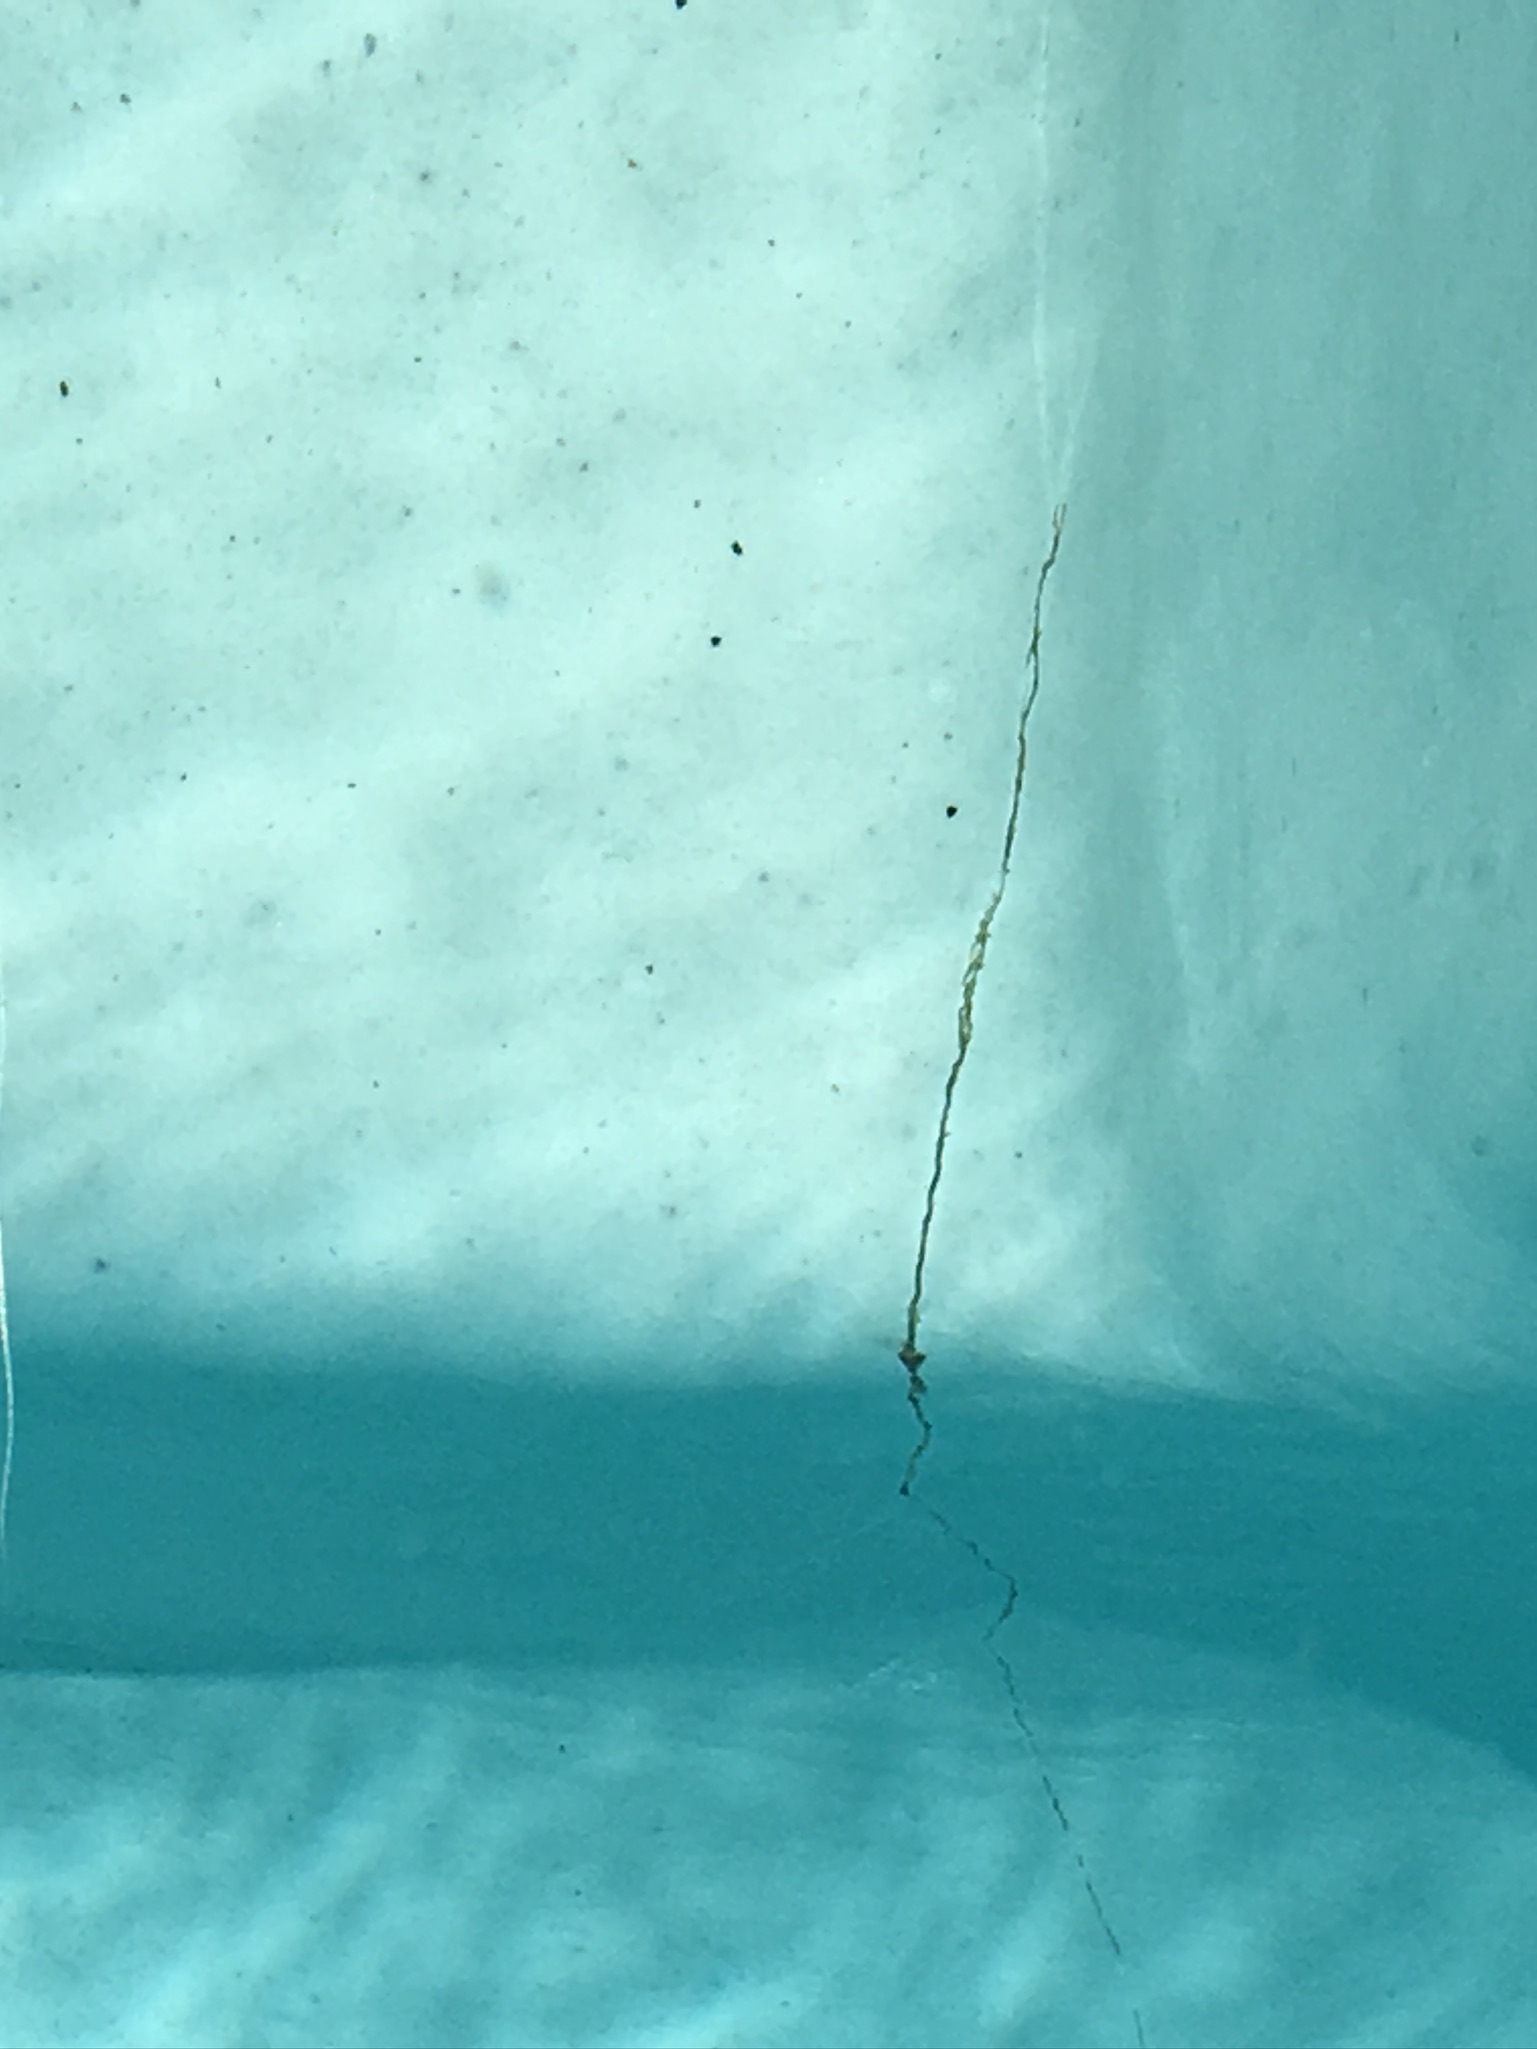 This is a plaster pool that has a crack on the surface. This would be a reason to consider resurfacing your pool.